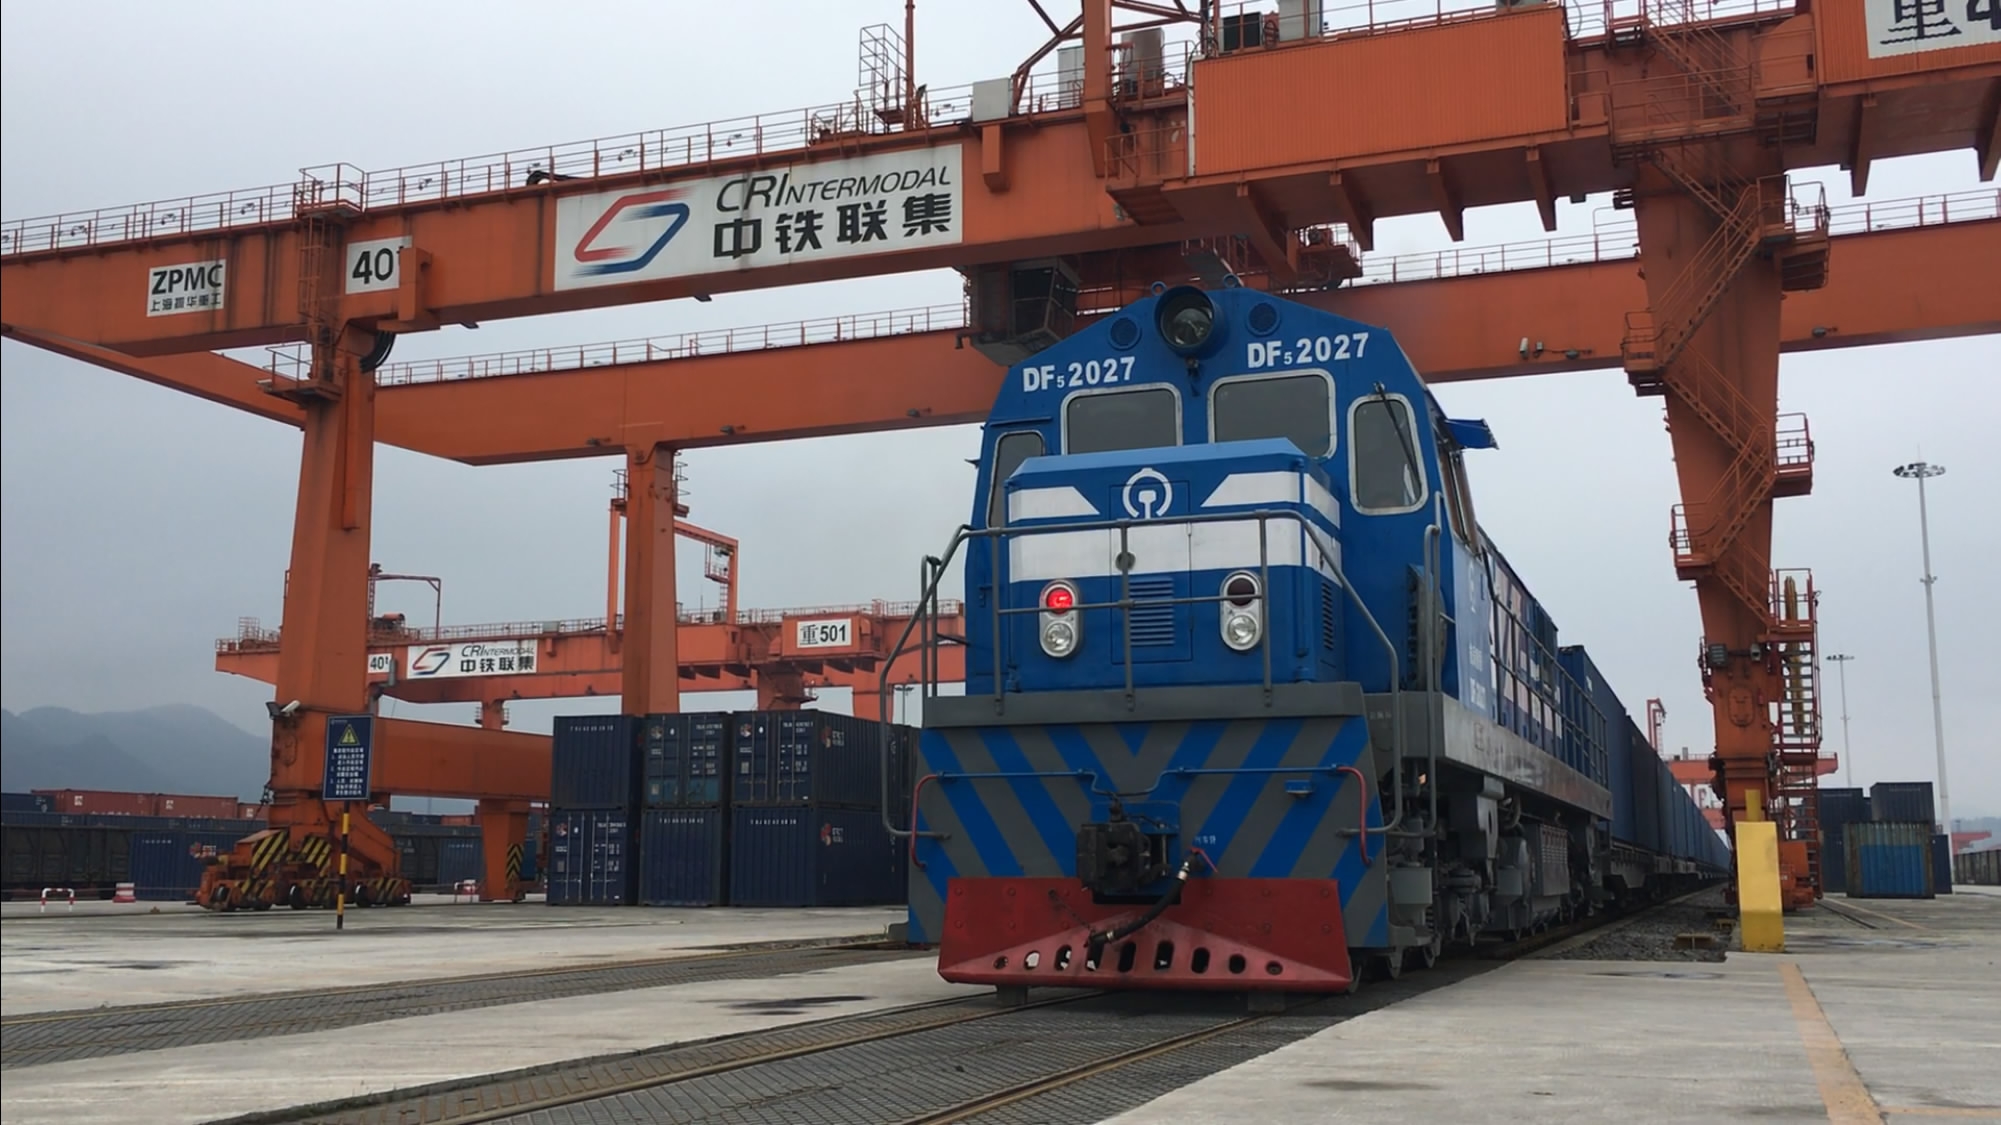 High-end products from China’s Chongqing shipped to Europe by rail - CGTN